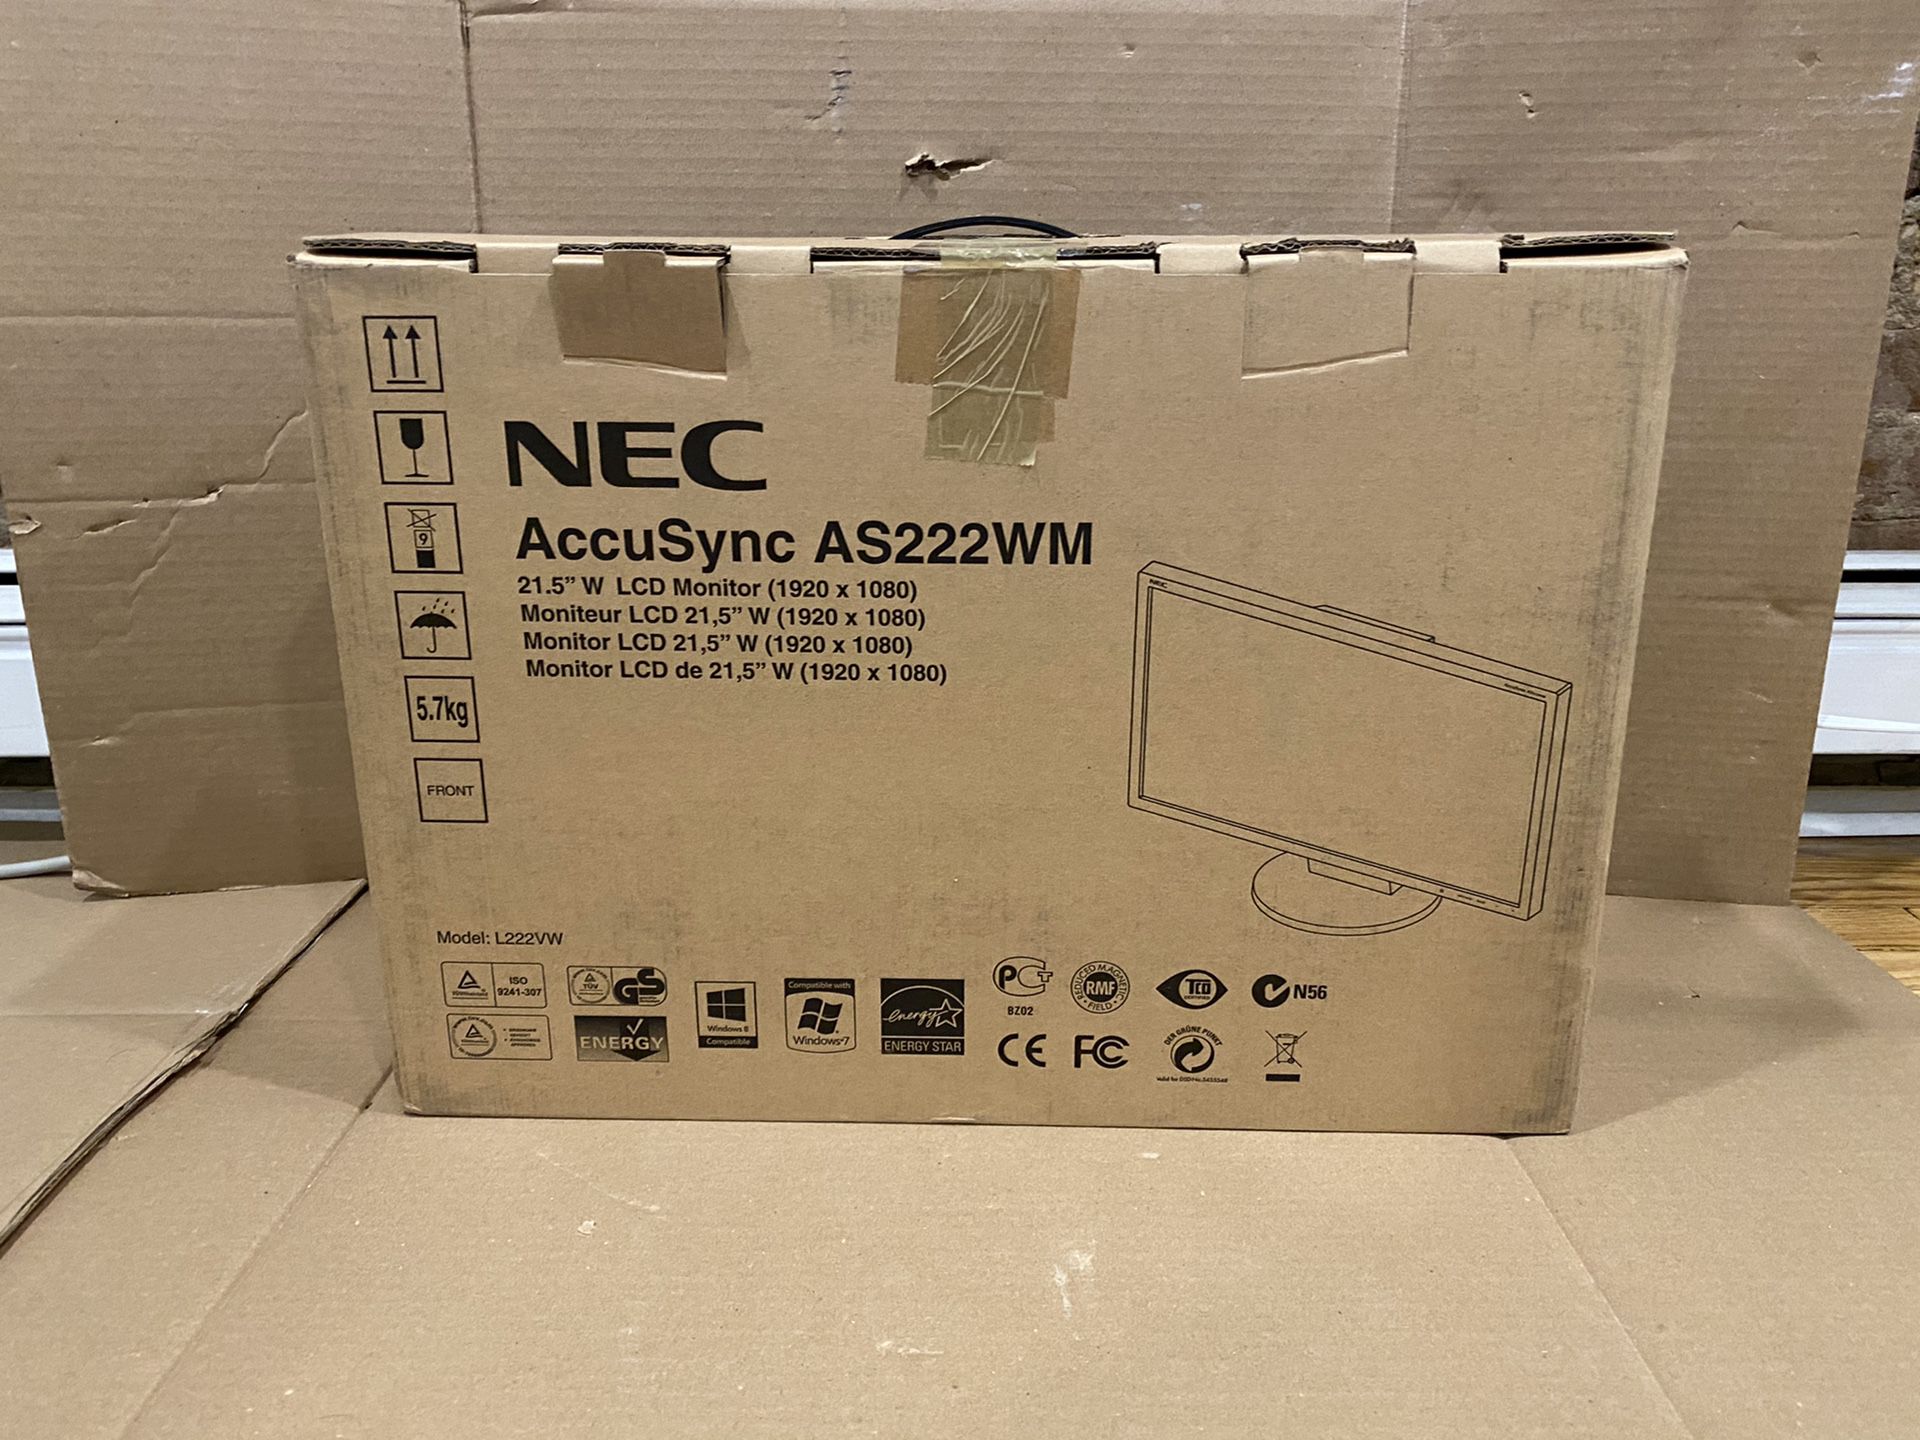 NEC AccuSync AS222WM 22” LED touchscreen monitor with new Mini DP Cable